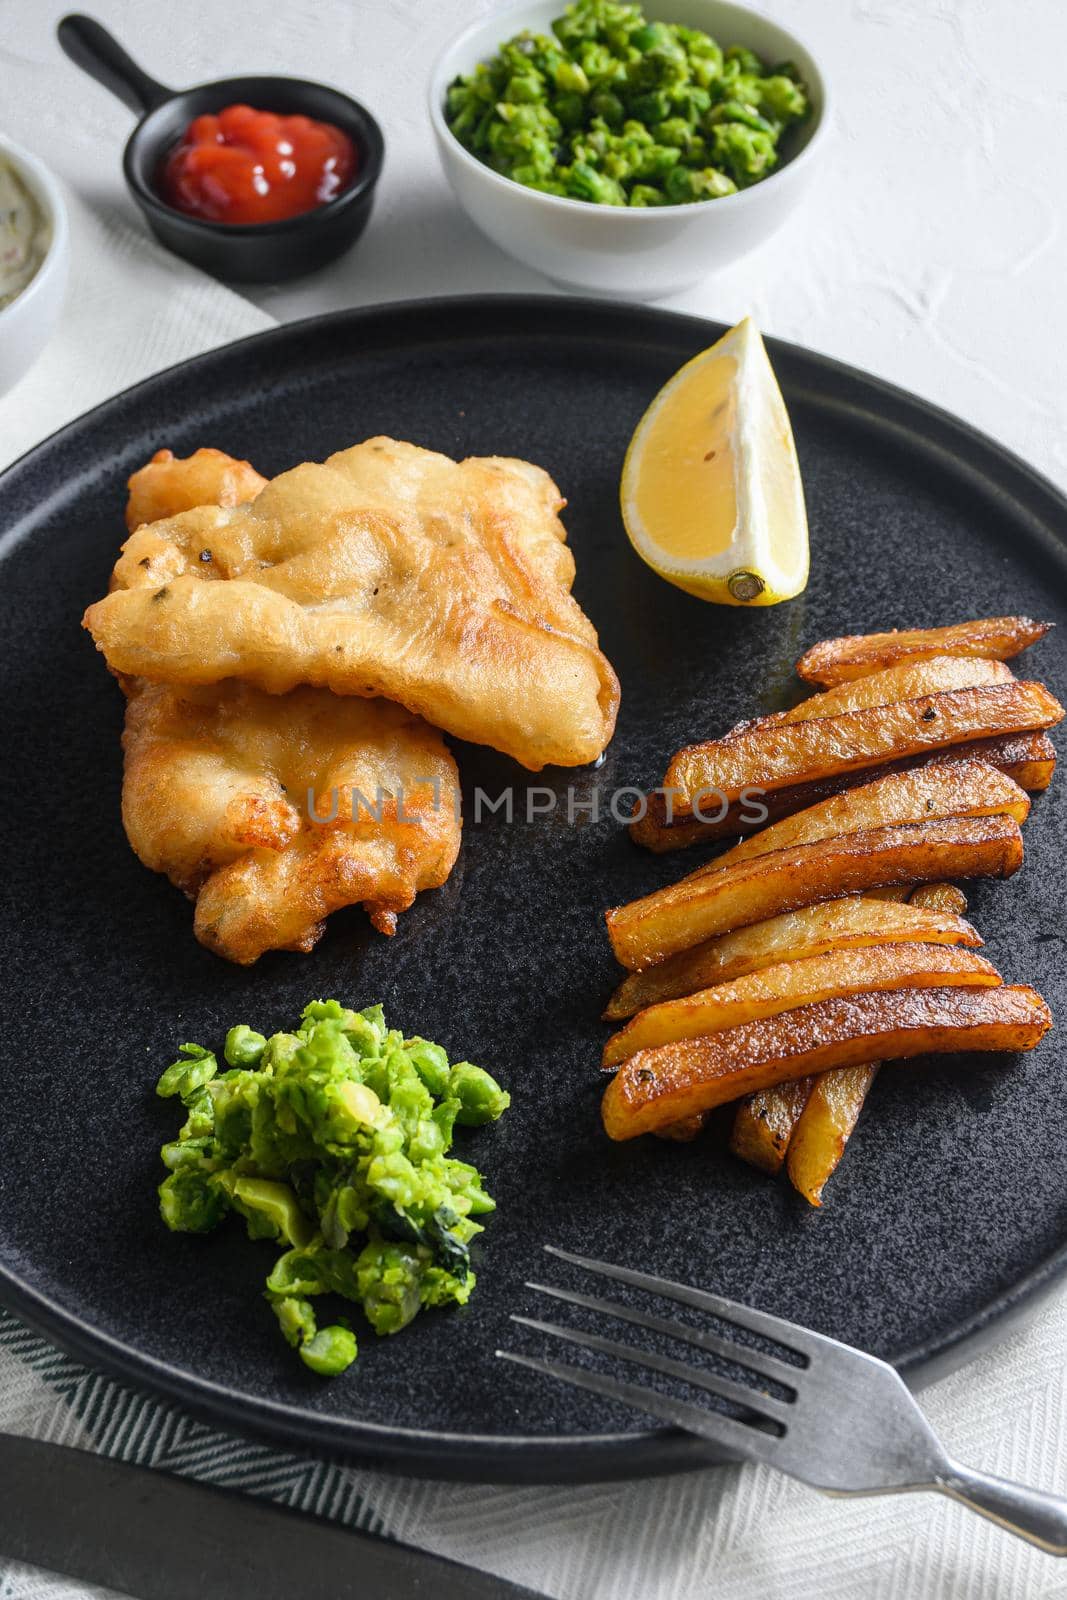 British Traditional Fish and chips with minty mashed peas detail and a slice of lemon. on black round plate over white lintn and stone surface.